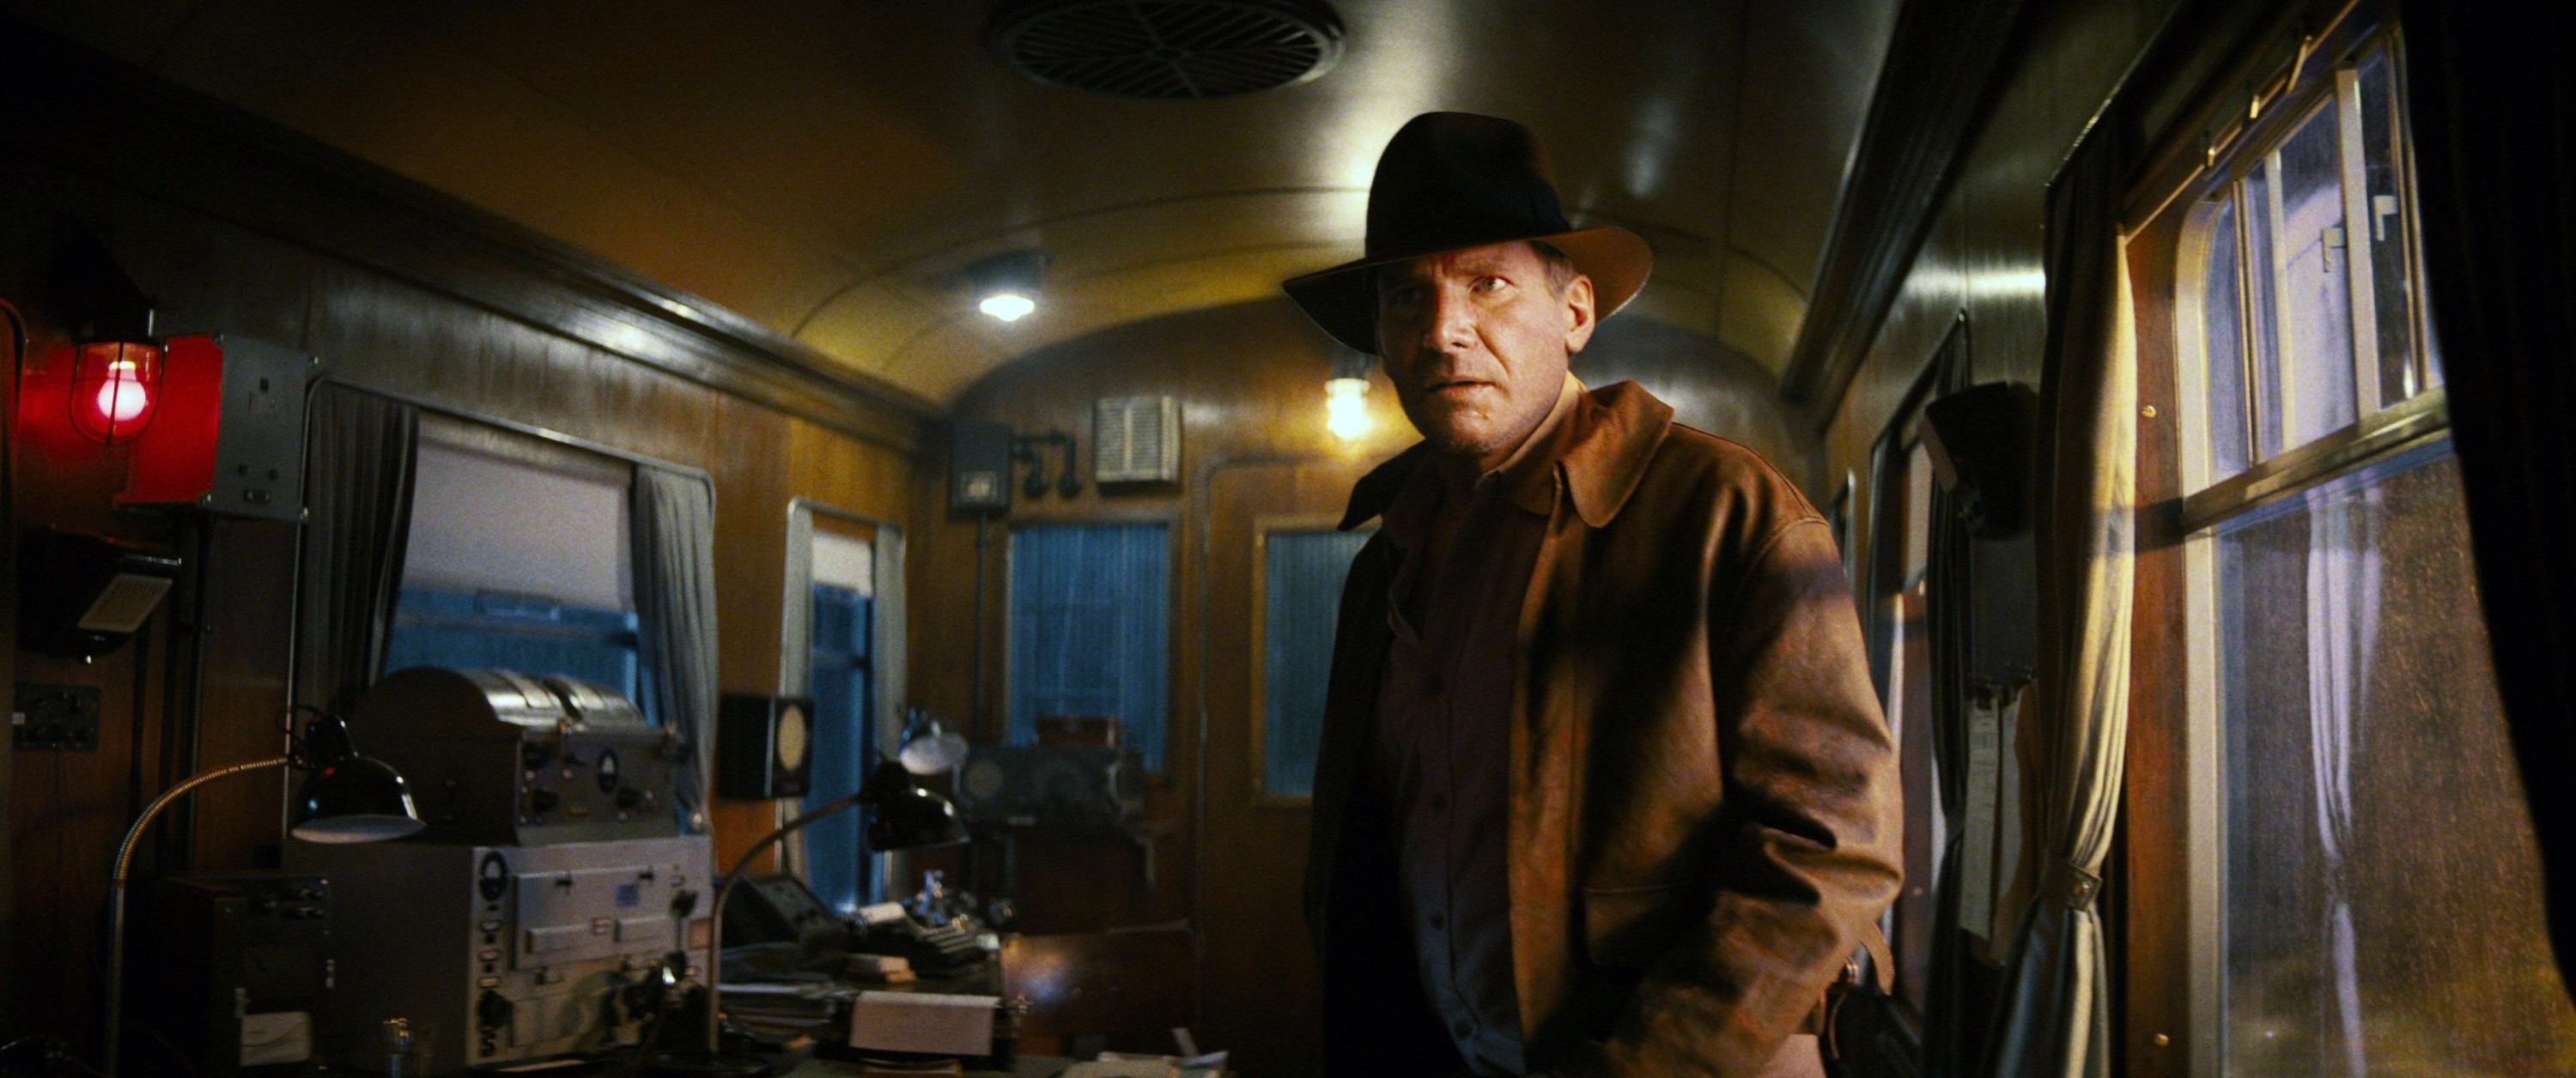 Indiana in a fedora and trench coat inside a vintage train car